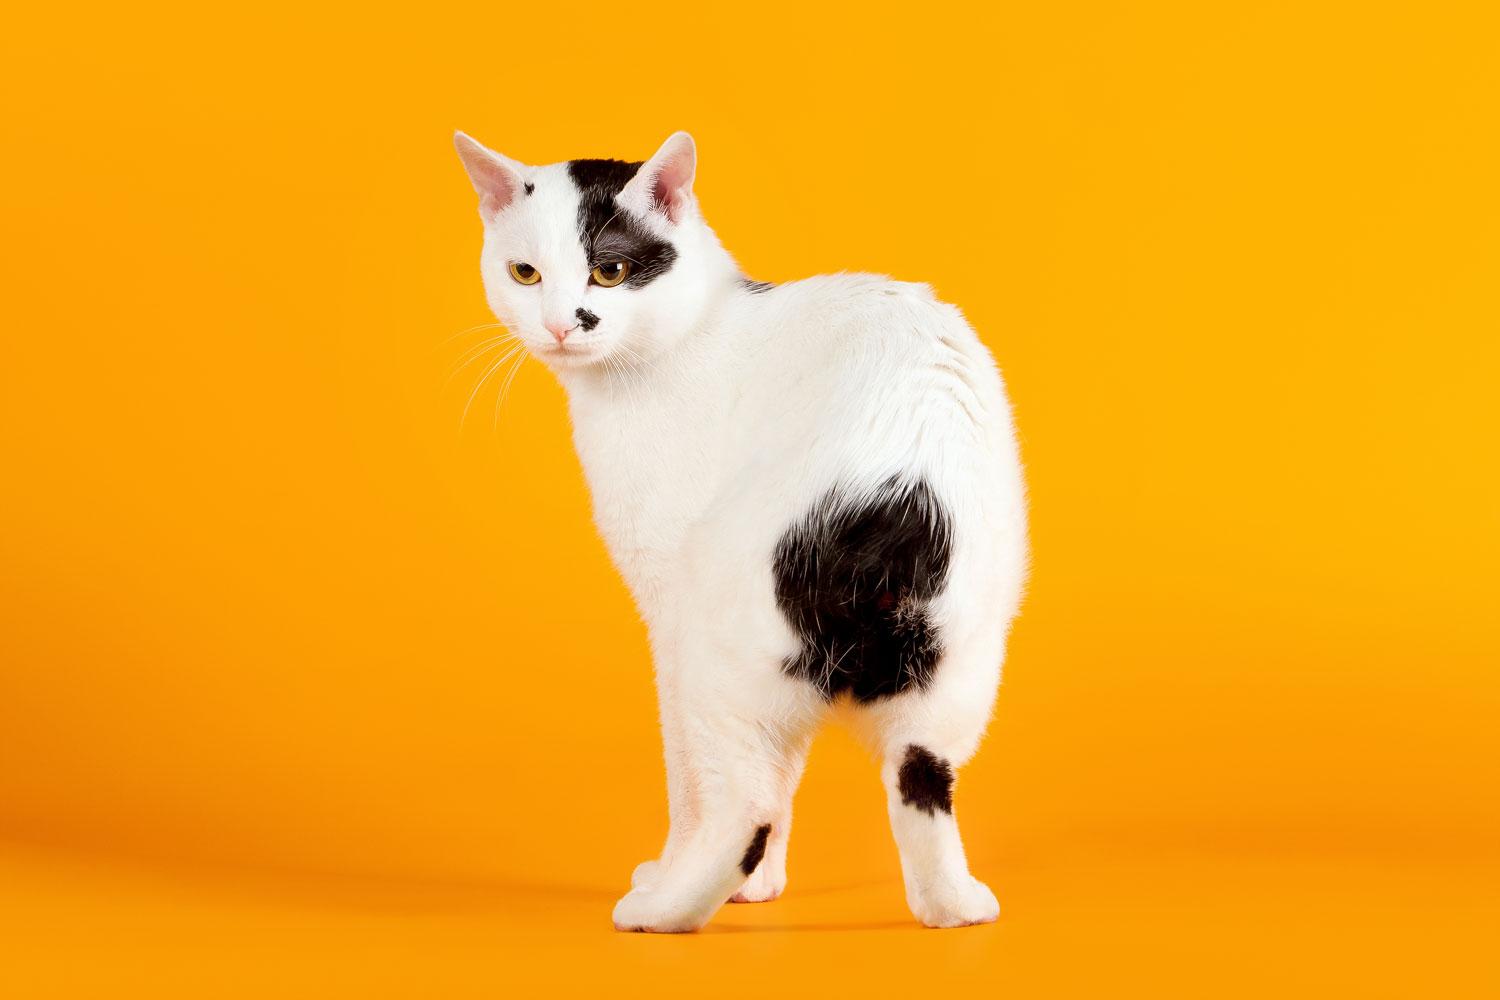 A Fierce white and black colored Japanese bobtail on an orange background